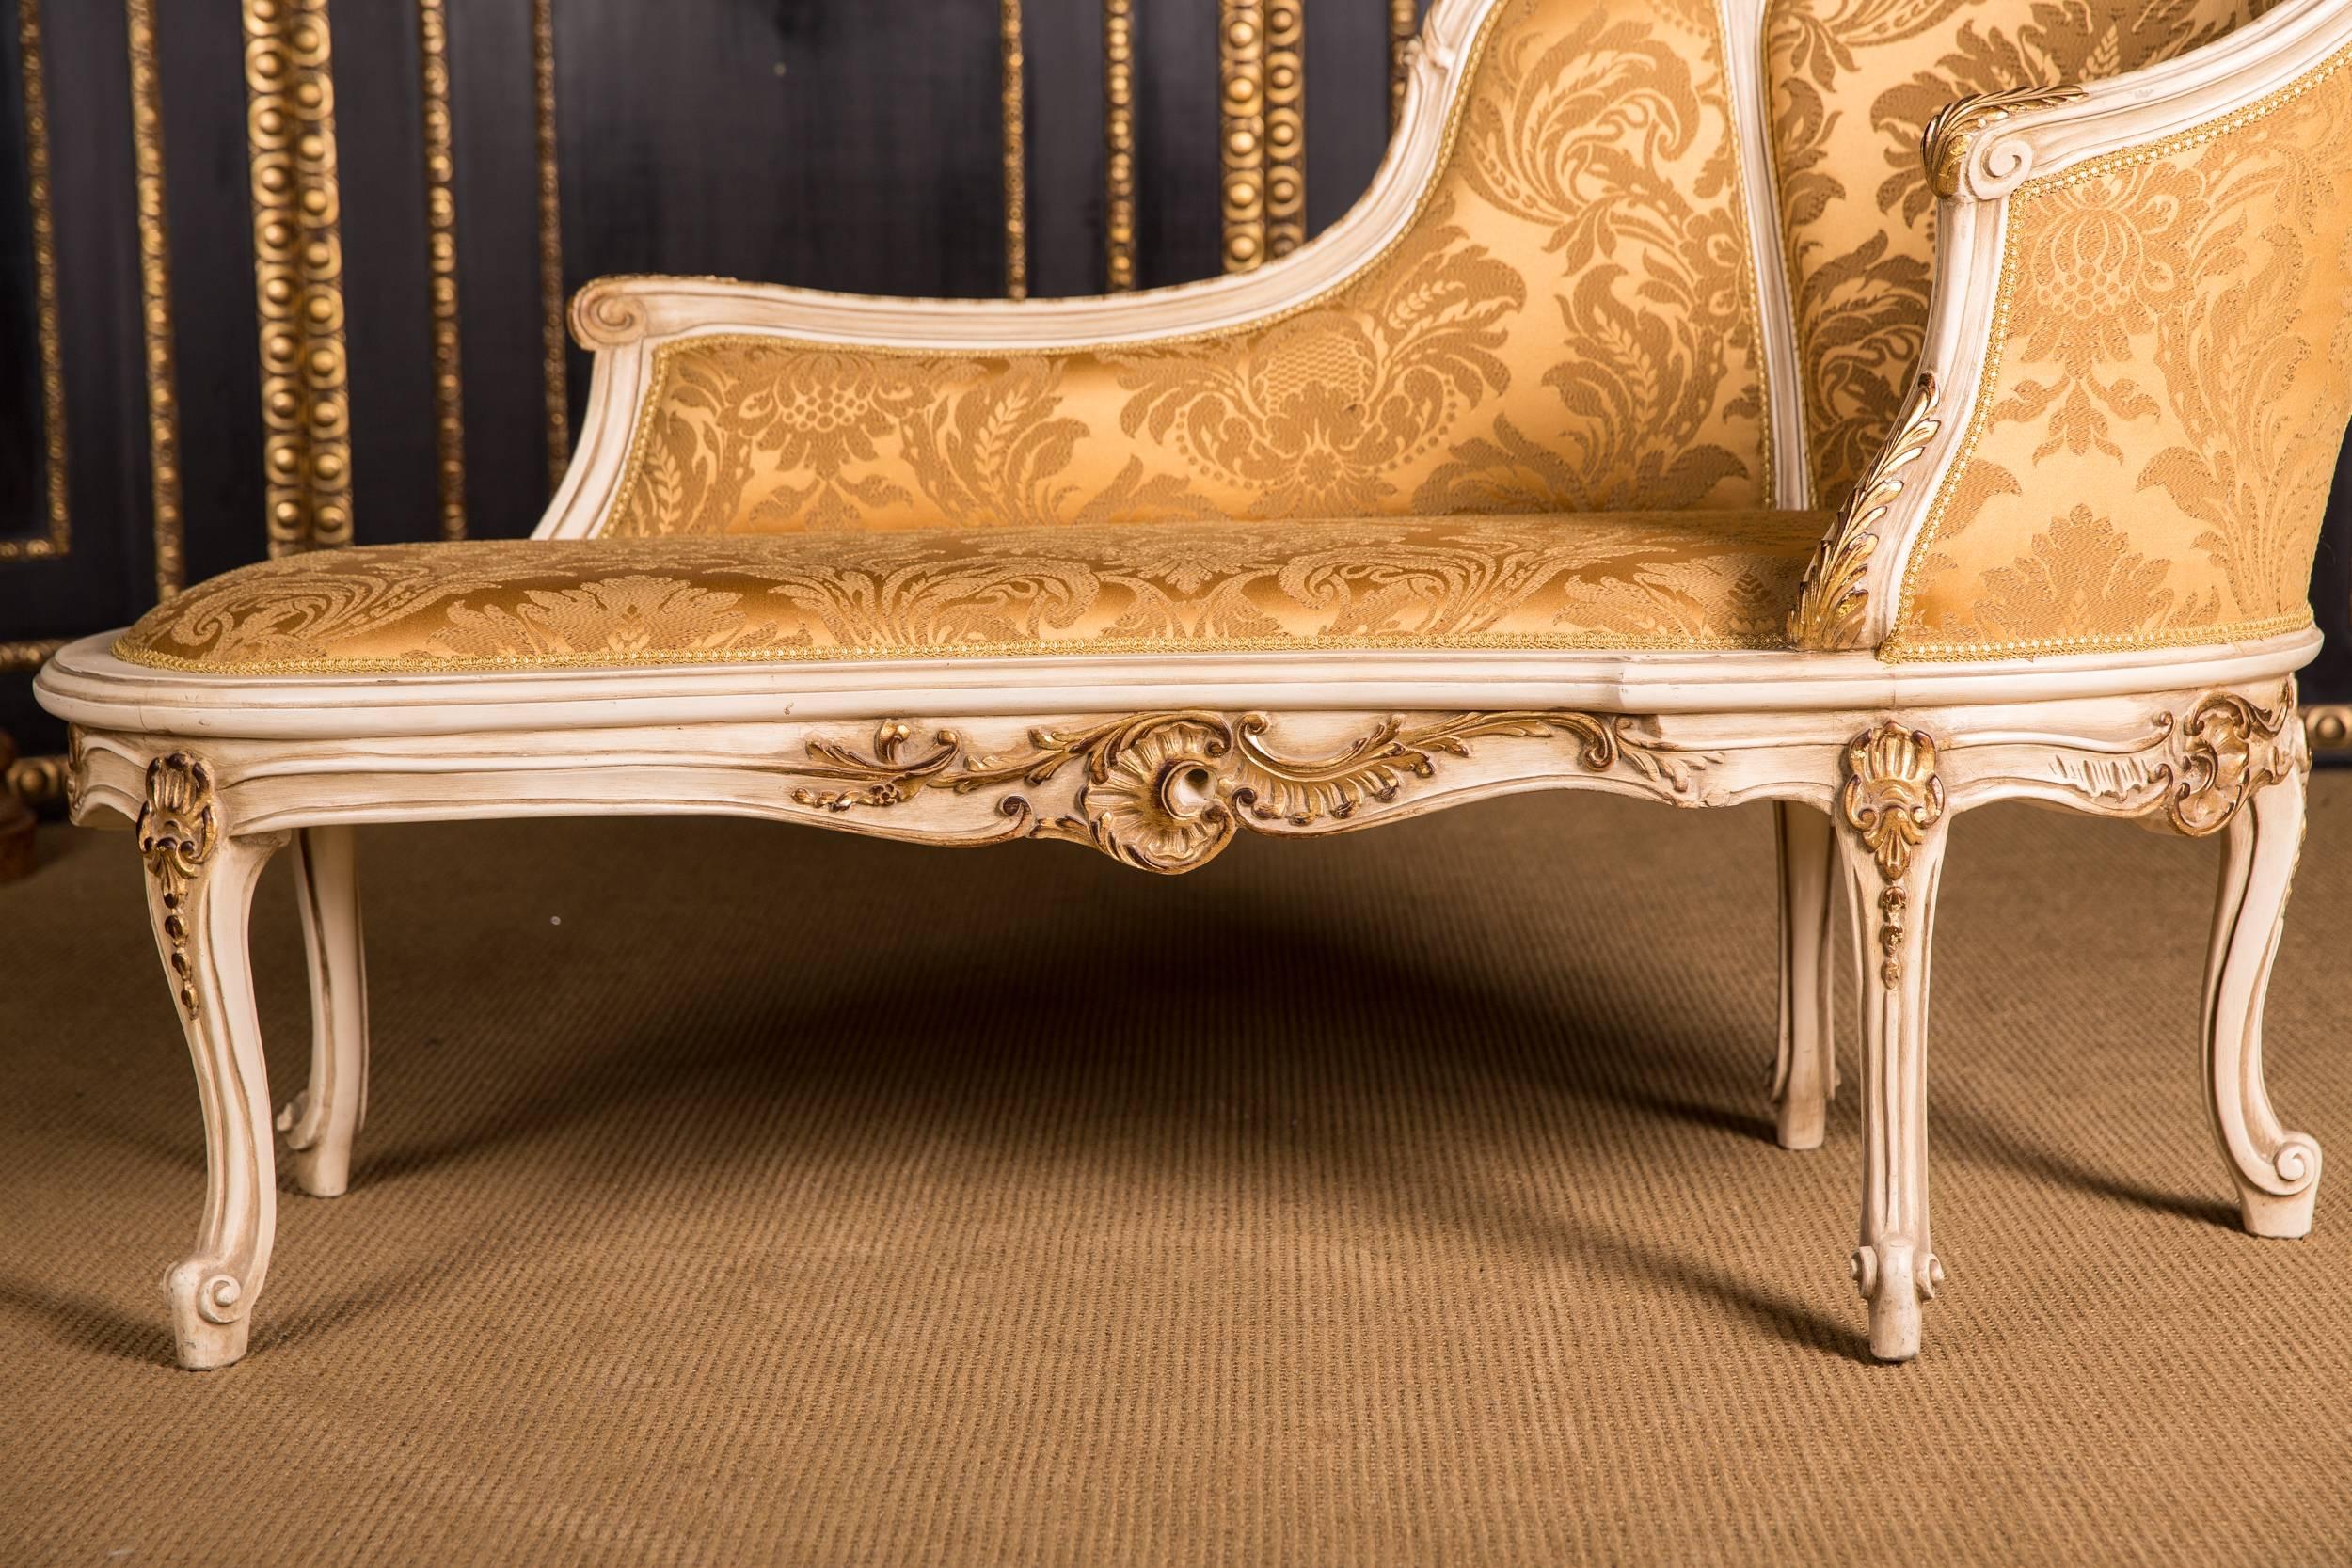 Louis XV Elegant French Chaise Longue in Louis Quinze Style